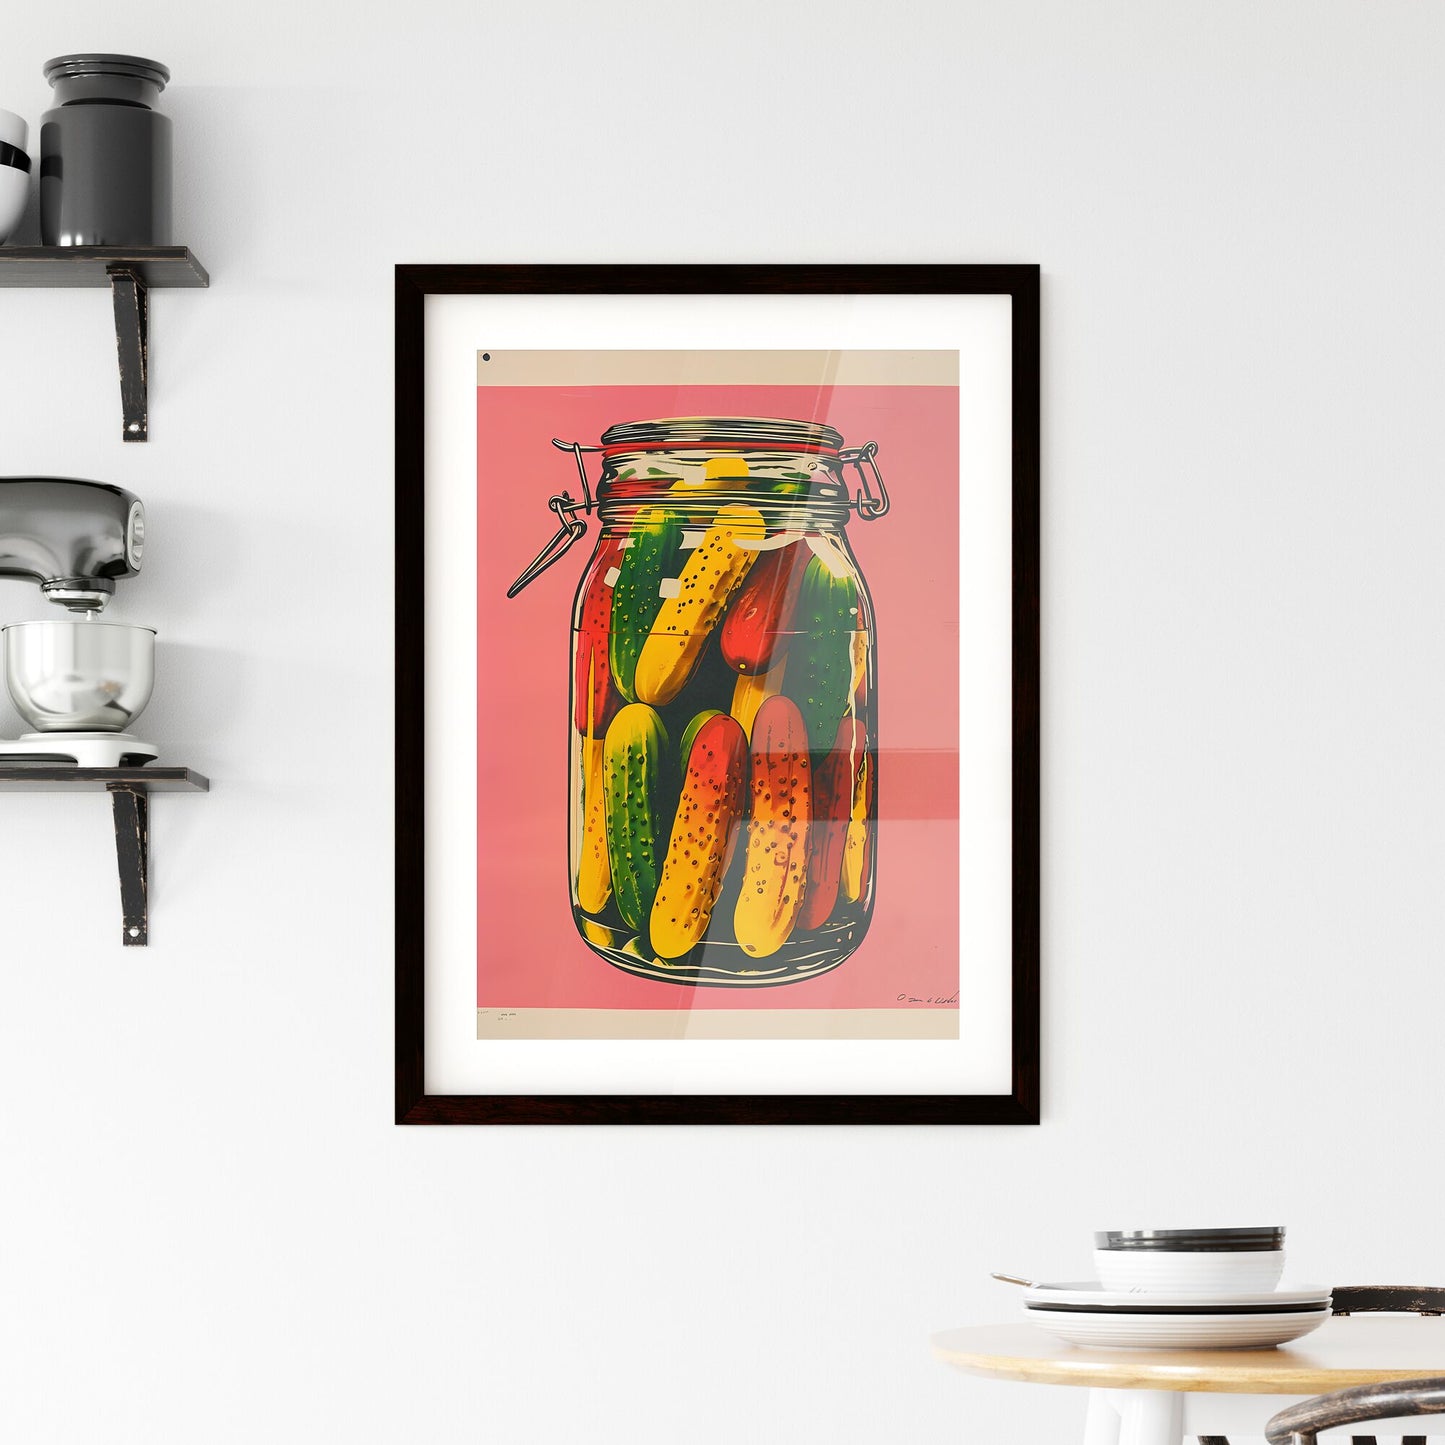 Colorful Woodcut Poster of Pickles in Glass Jar on Pink, Simple Playful Composition, High-Resolution Still Life Art Print Default Title